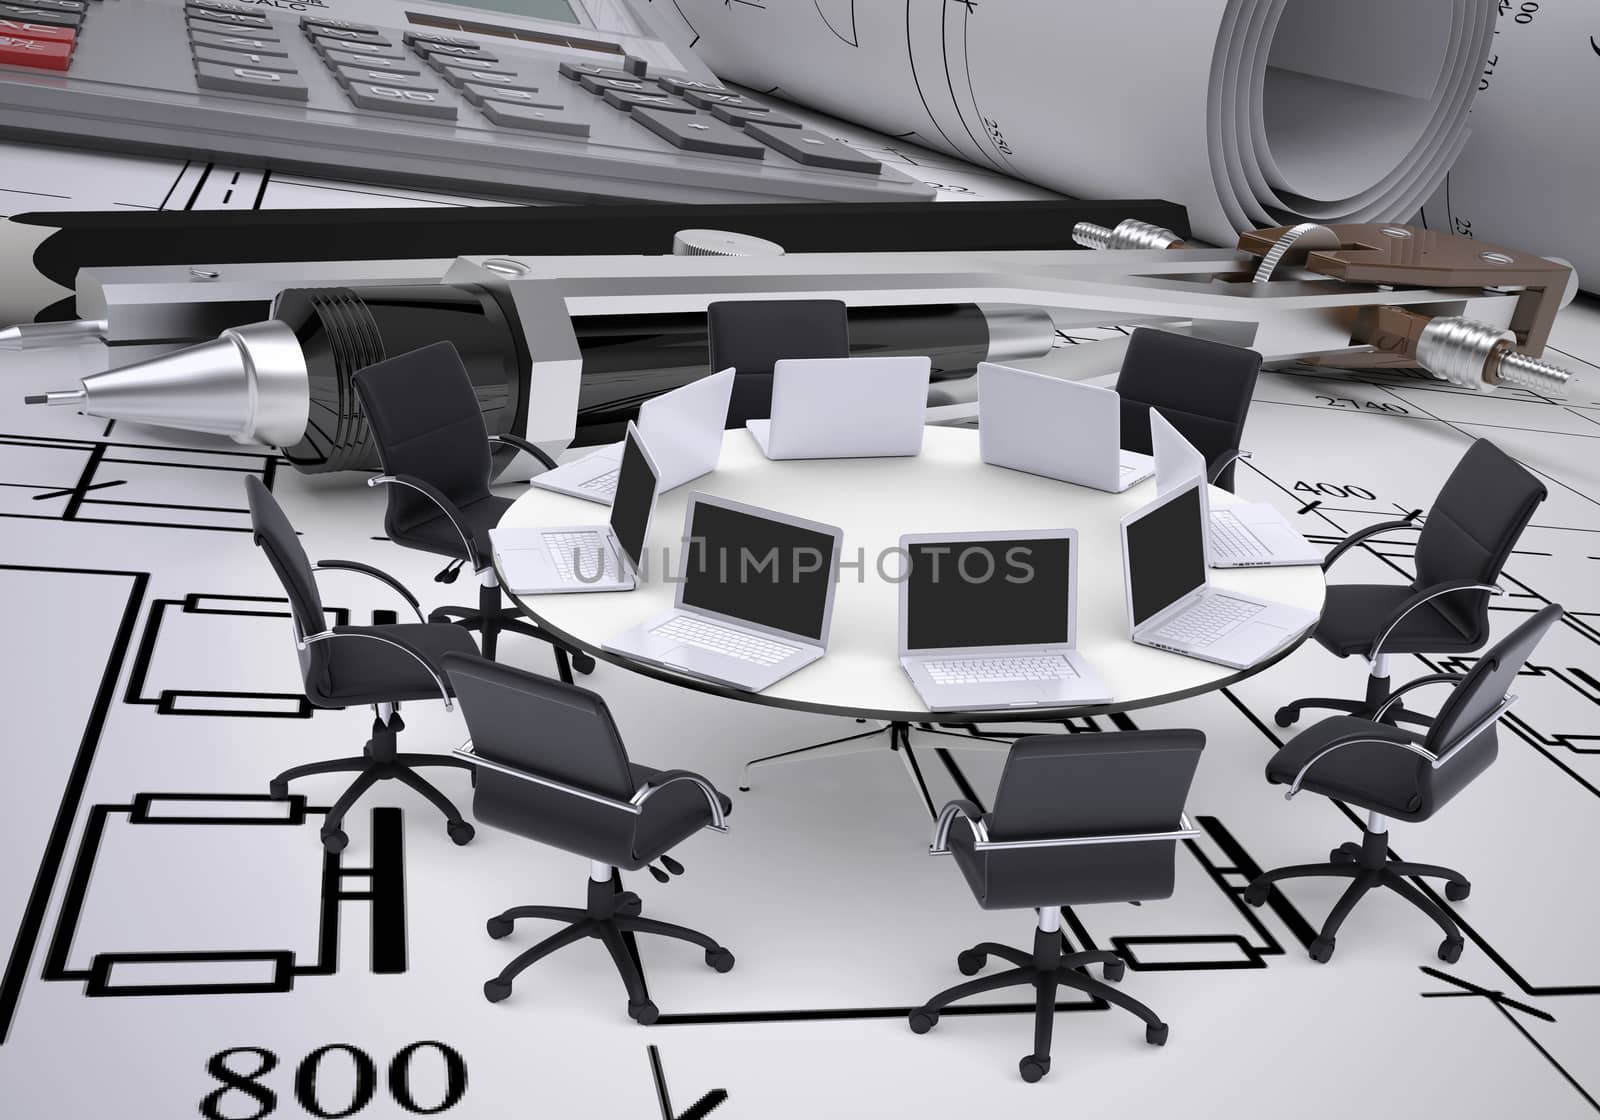 Miniature round table with laptops on it and chairs around, drawing compasses, placed on spread technical drawing. Construction business concept